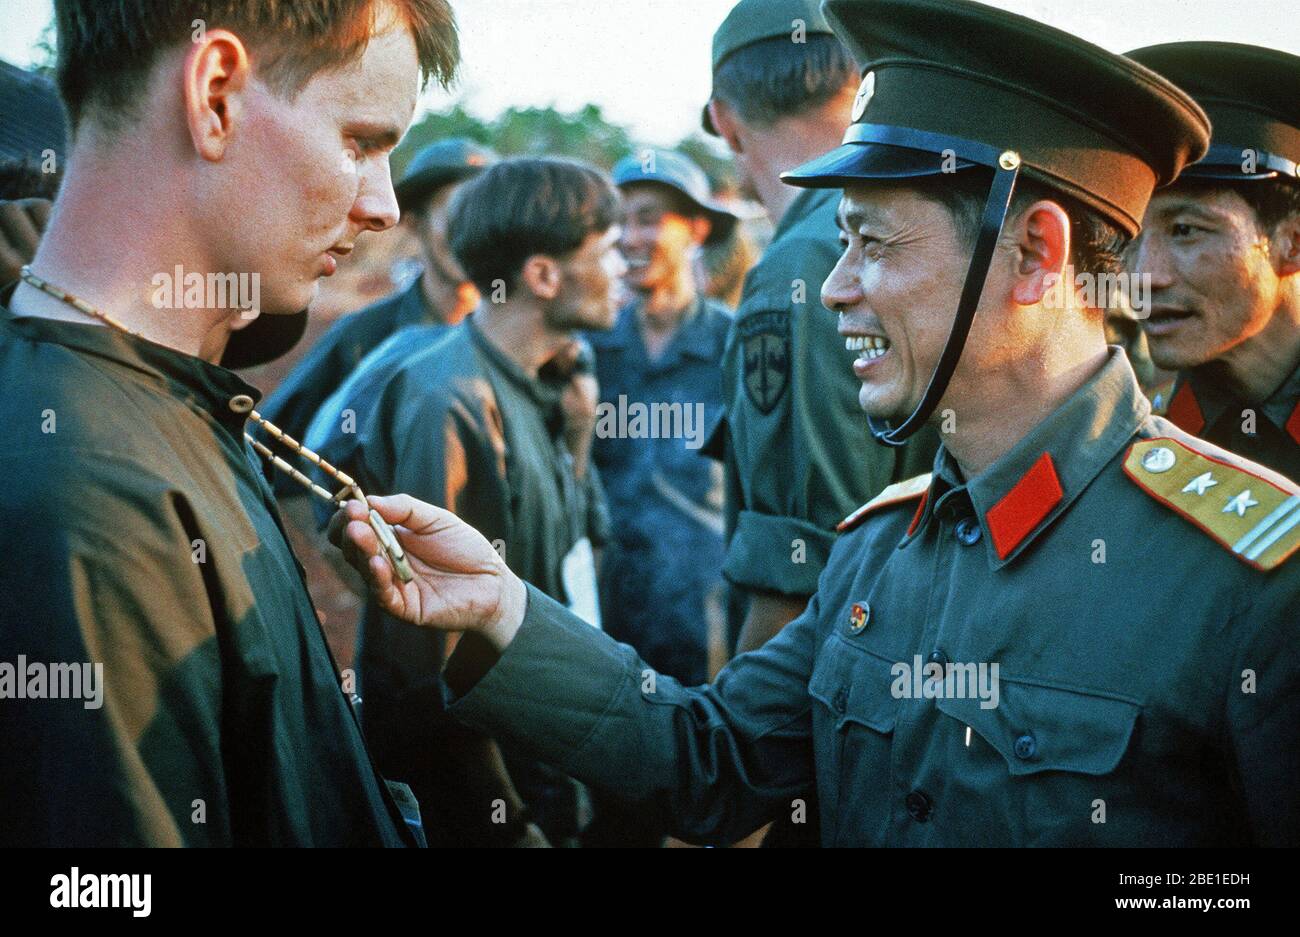 SPC-4 Richard Springman, U.S. Army, Captured 25 May 70) talks with a North Vietnamese Army officer who is looking at his peace symbol.  He is one of the twenty eight American POWs who were released by the Viet Cong on Feruary 12, 1973. Stock Photo